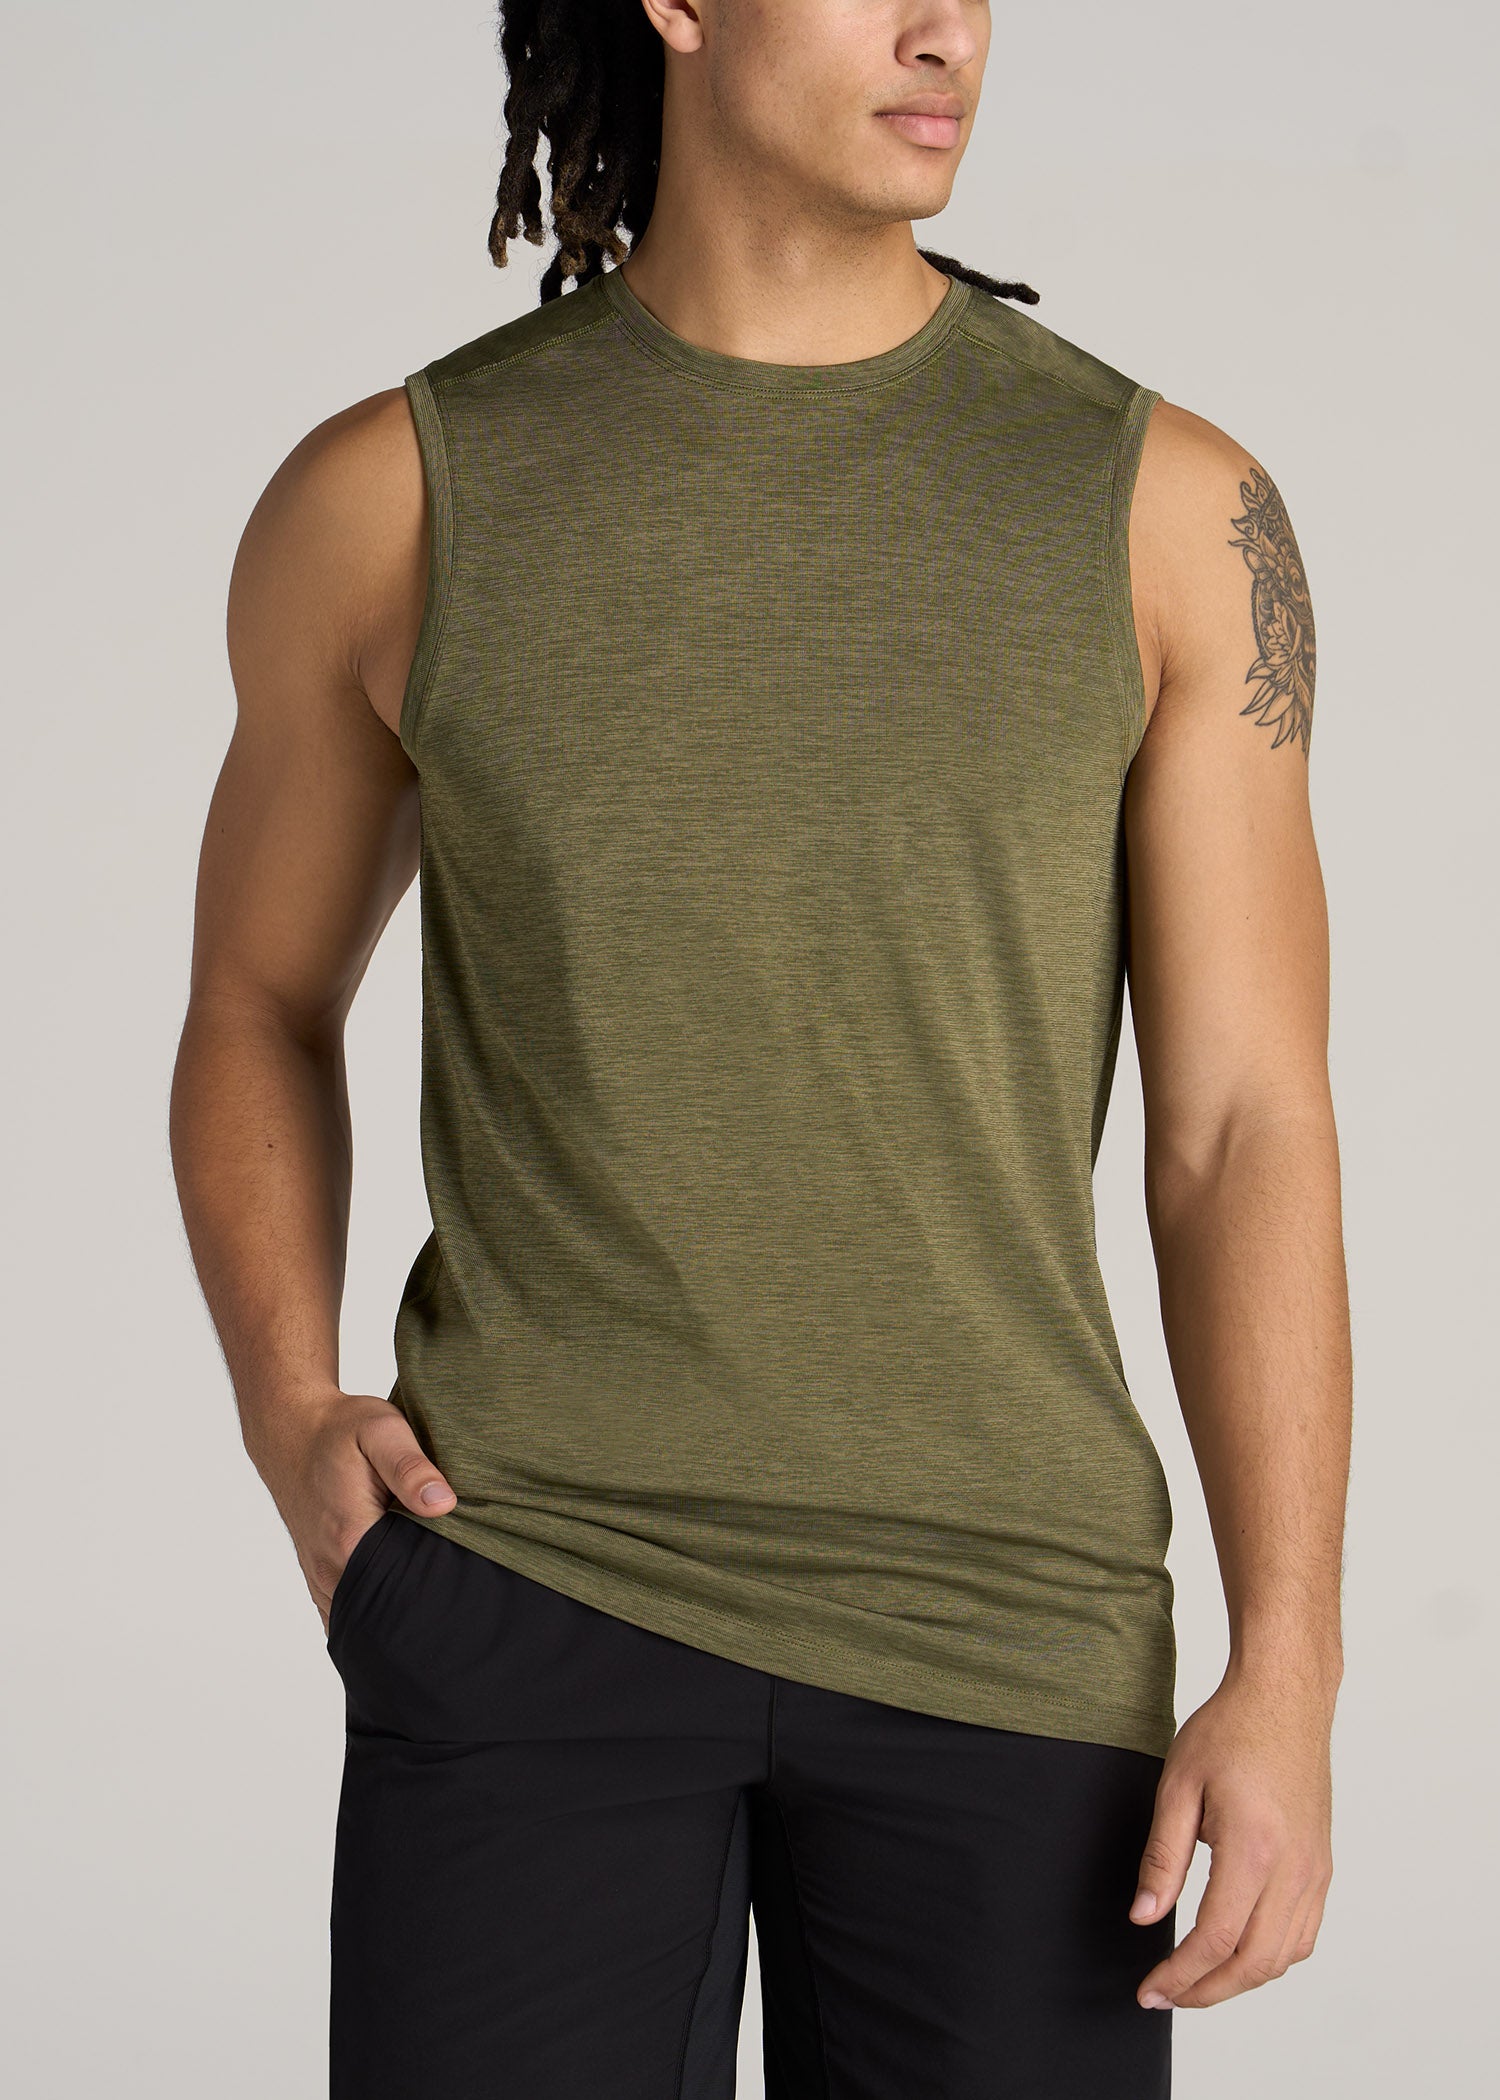 Olive green tank tops